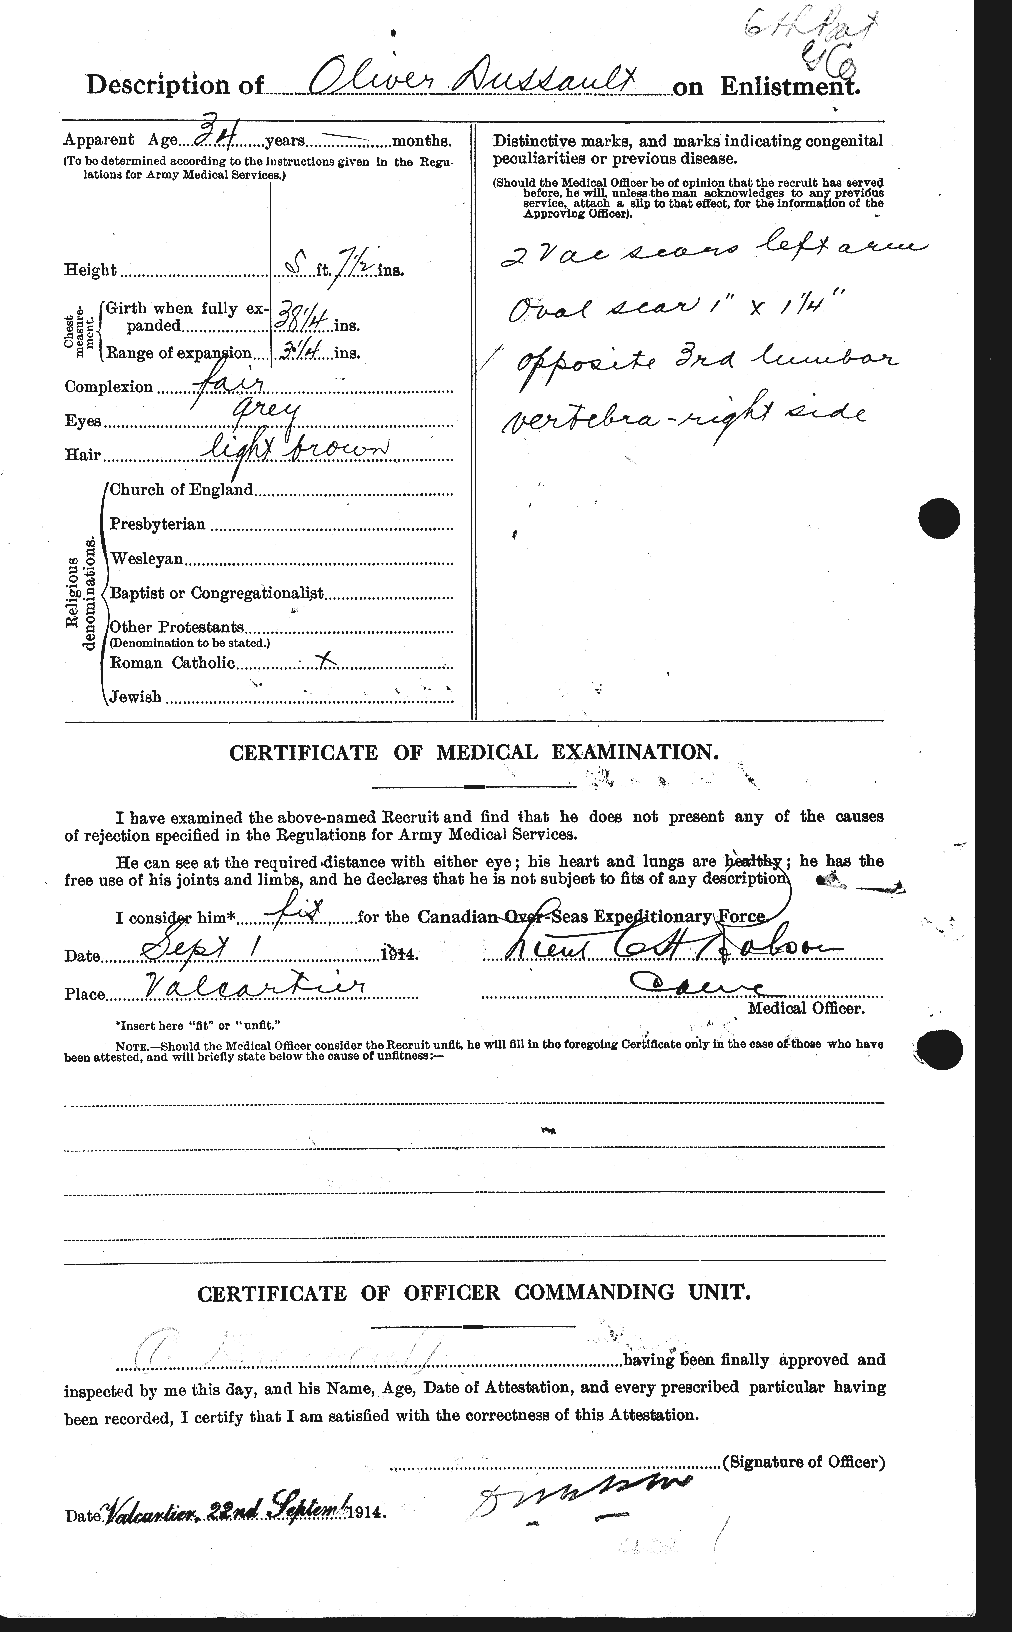 Personnel Records of the First World War - CEF 304097b